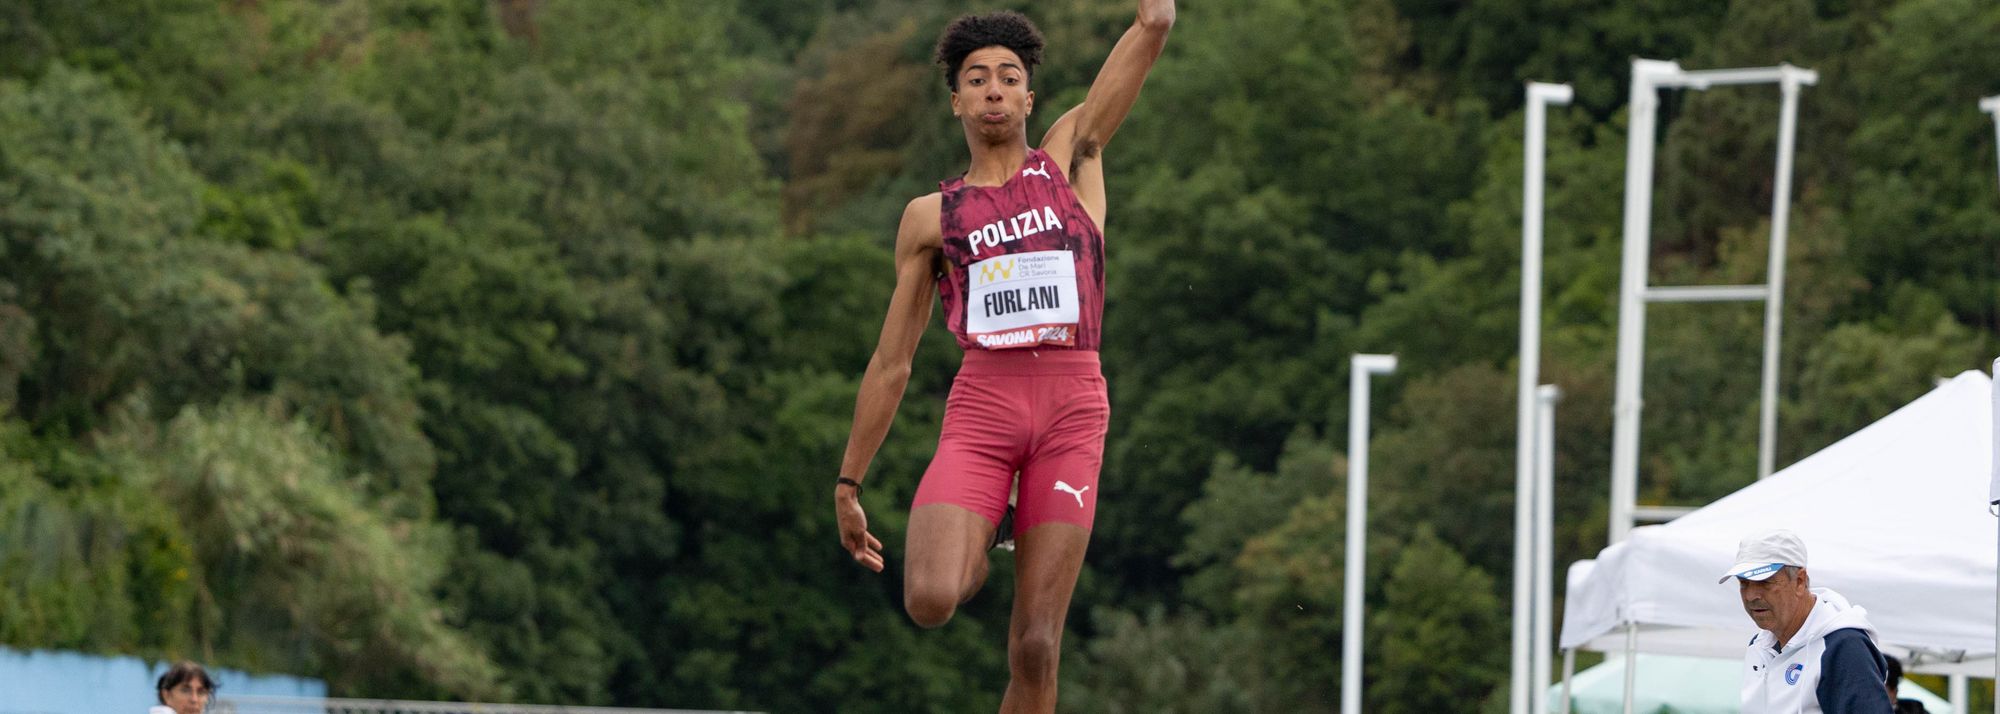 A world U20 long jump record of 8.36m by Mattia Furlani and a 22.95m shot put performance by Leonardo Fabbri were the standout results at the Continental Tour Challenger event